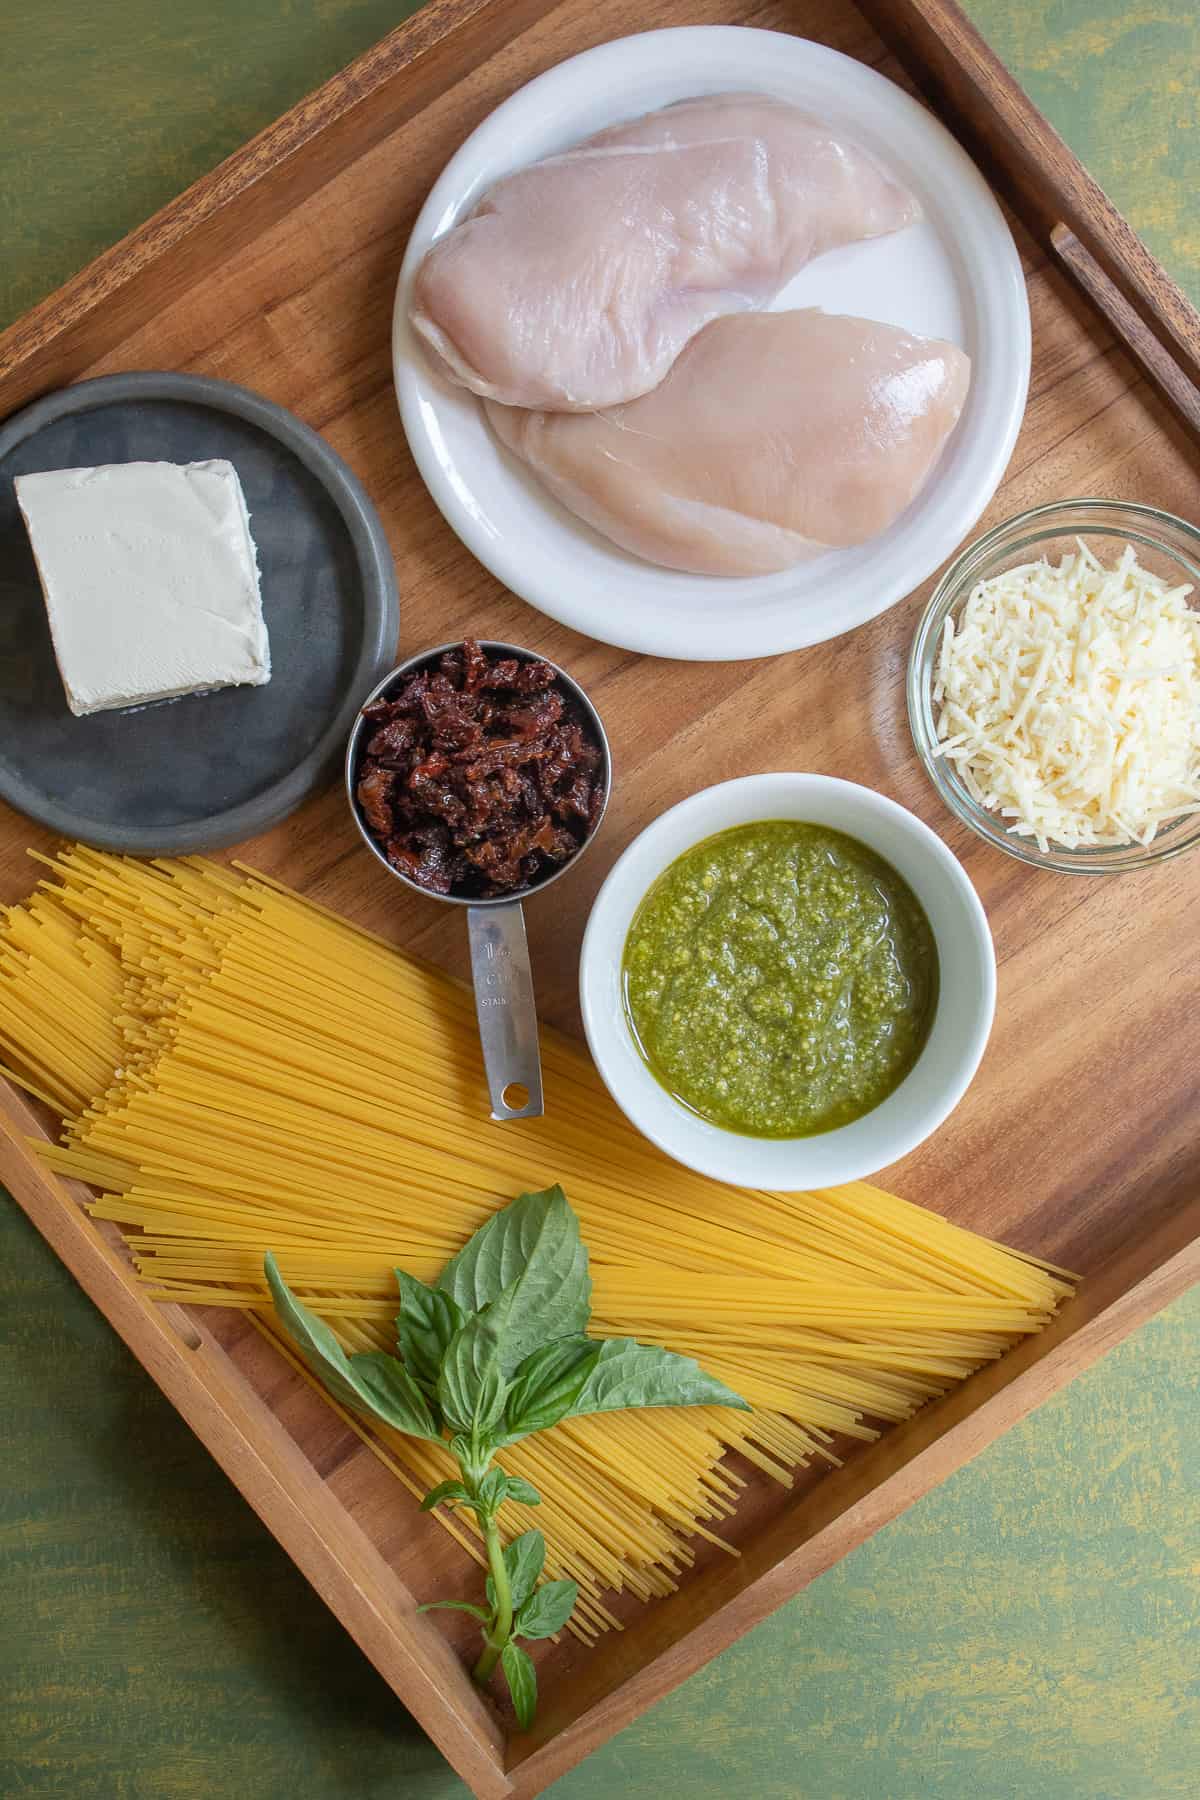 The ingredients for the chicken spaghetti are displayed on a wood tray on top of a green surface.